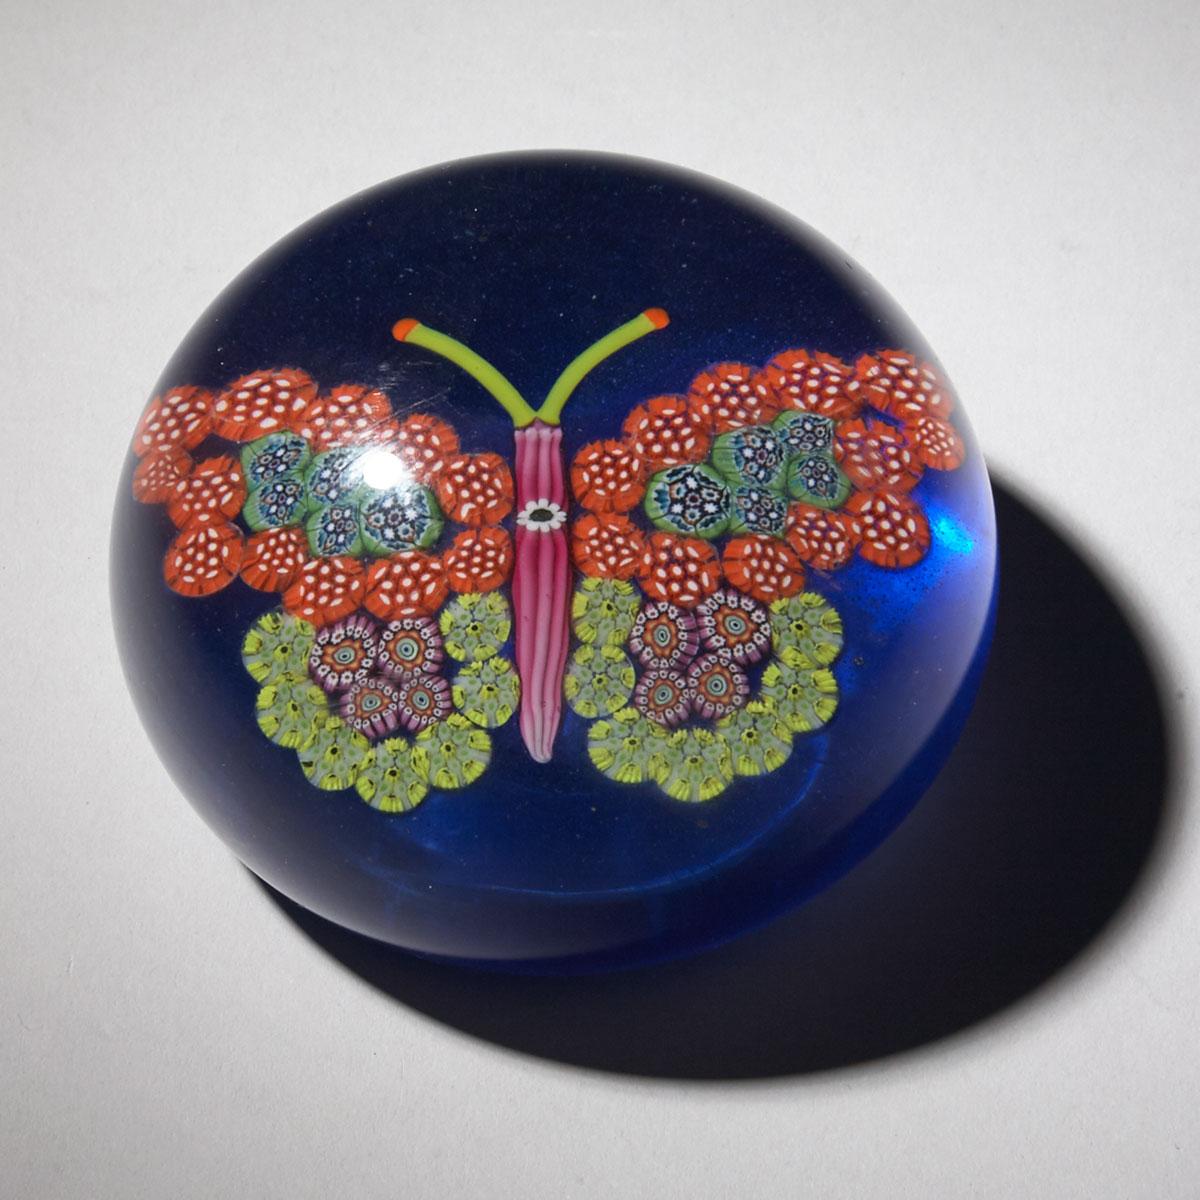 Blue-Ground Millefiori Butterfly Glass Paperweight, possibly Ysart, 20th century